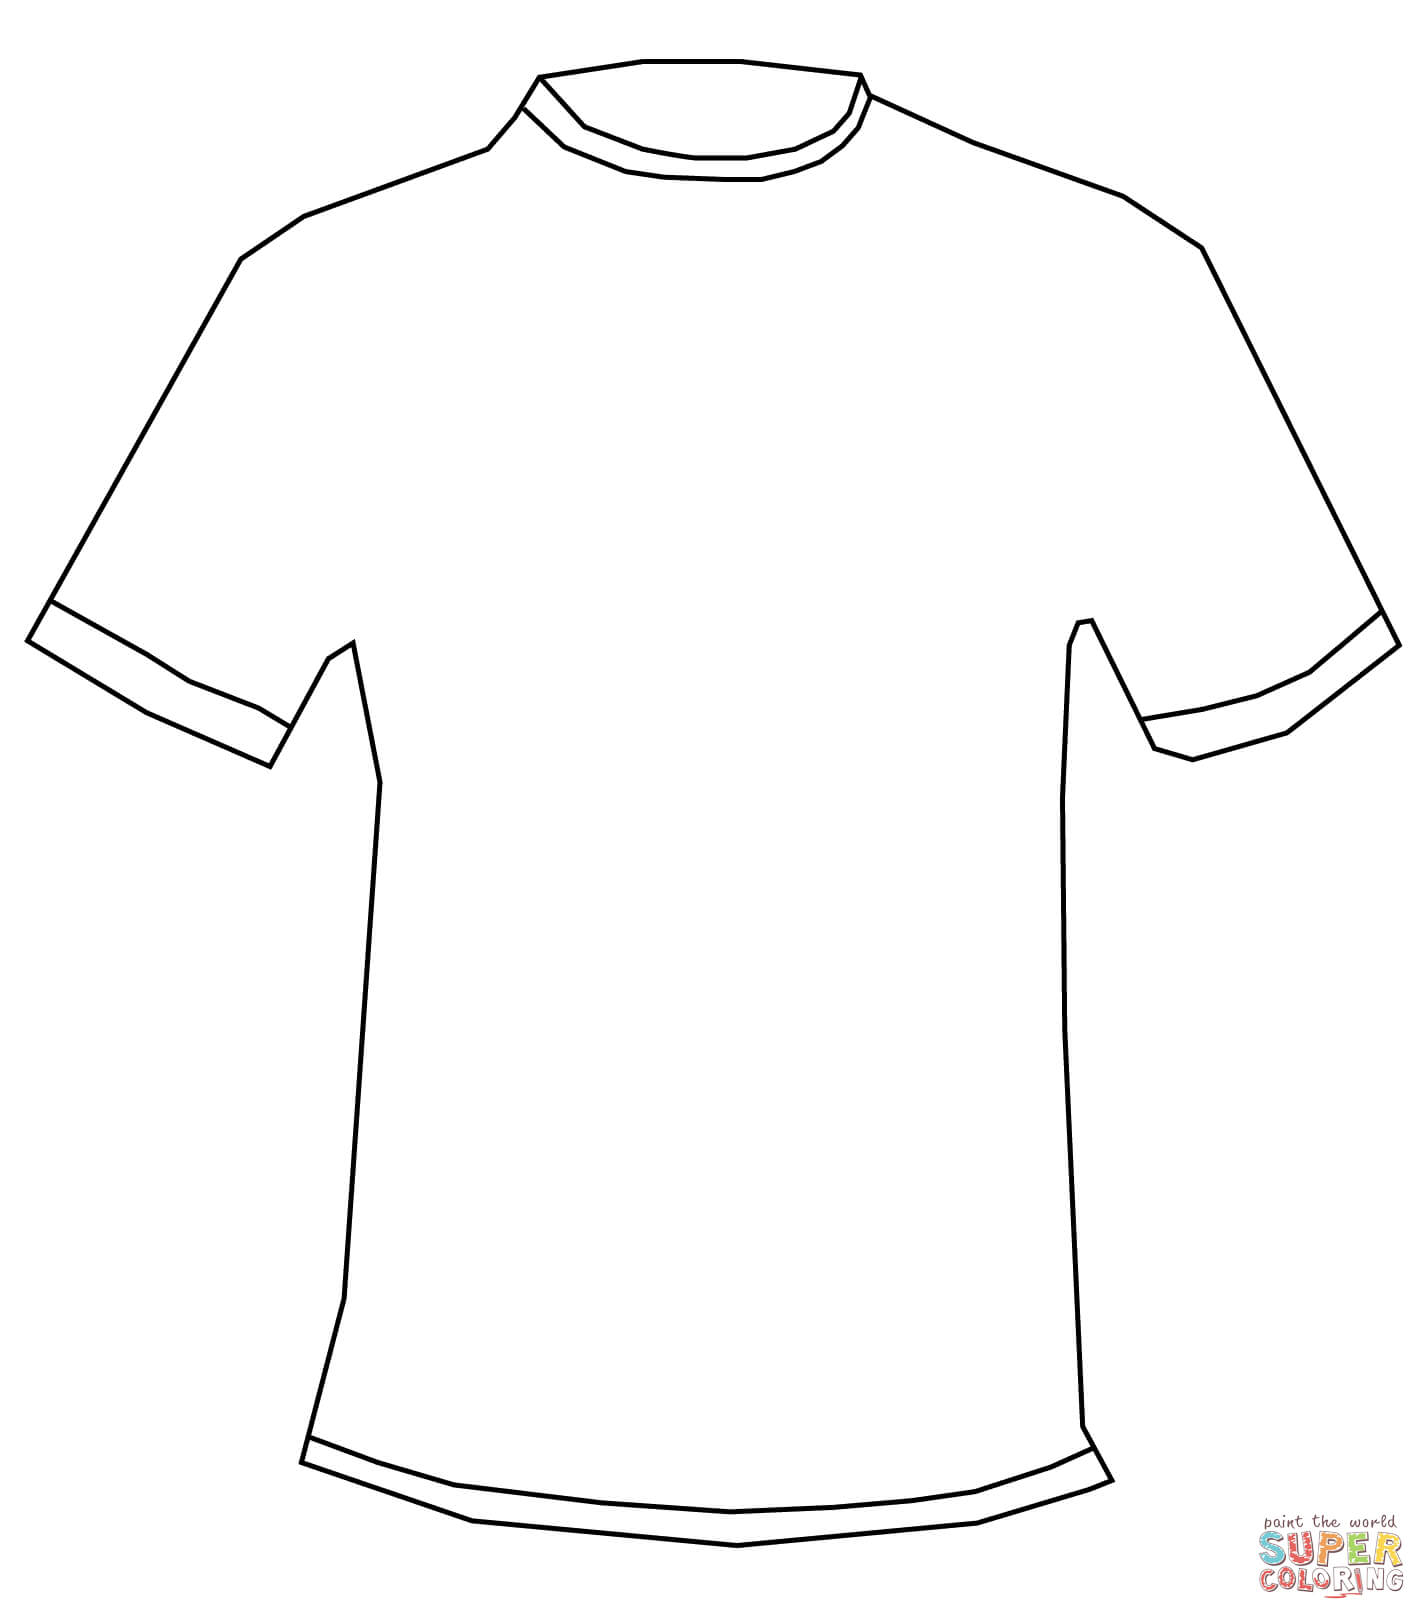 T Shirt Coloring Page | Free Printable Coloring Pages Pertaining To Blank Tshirt Template Printable